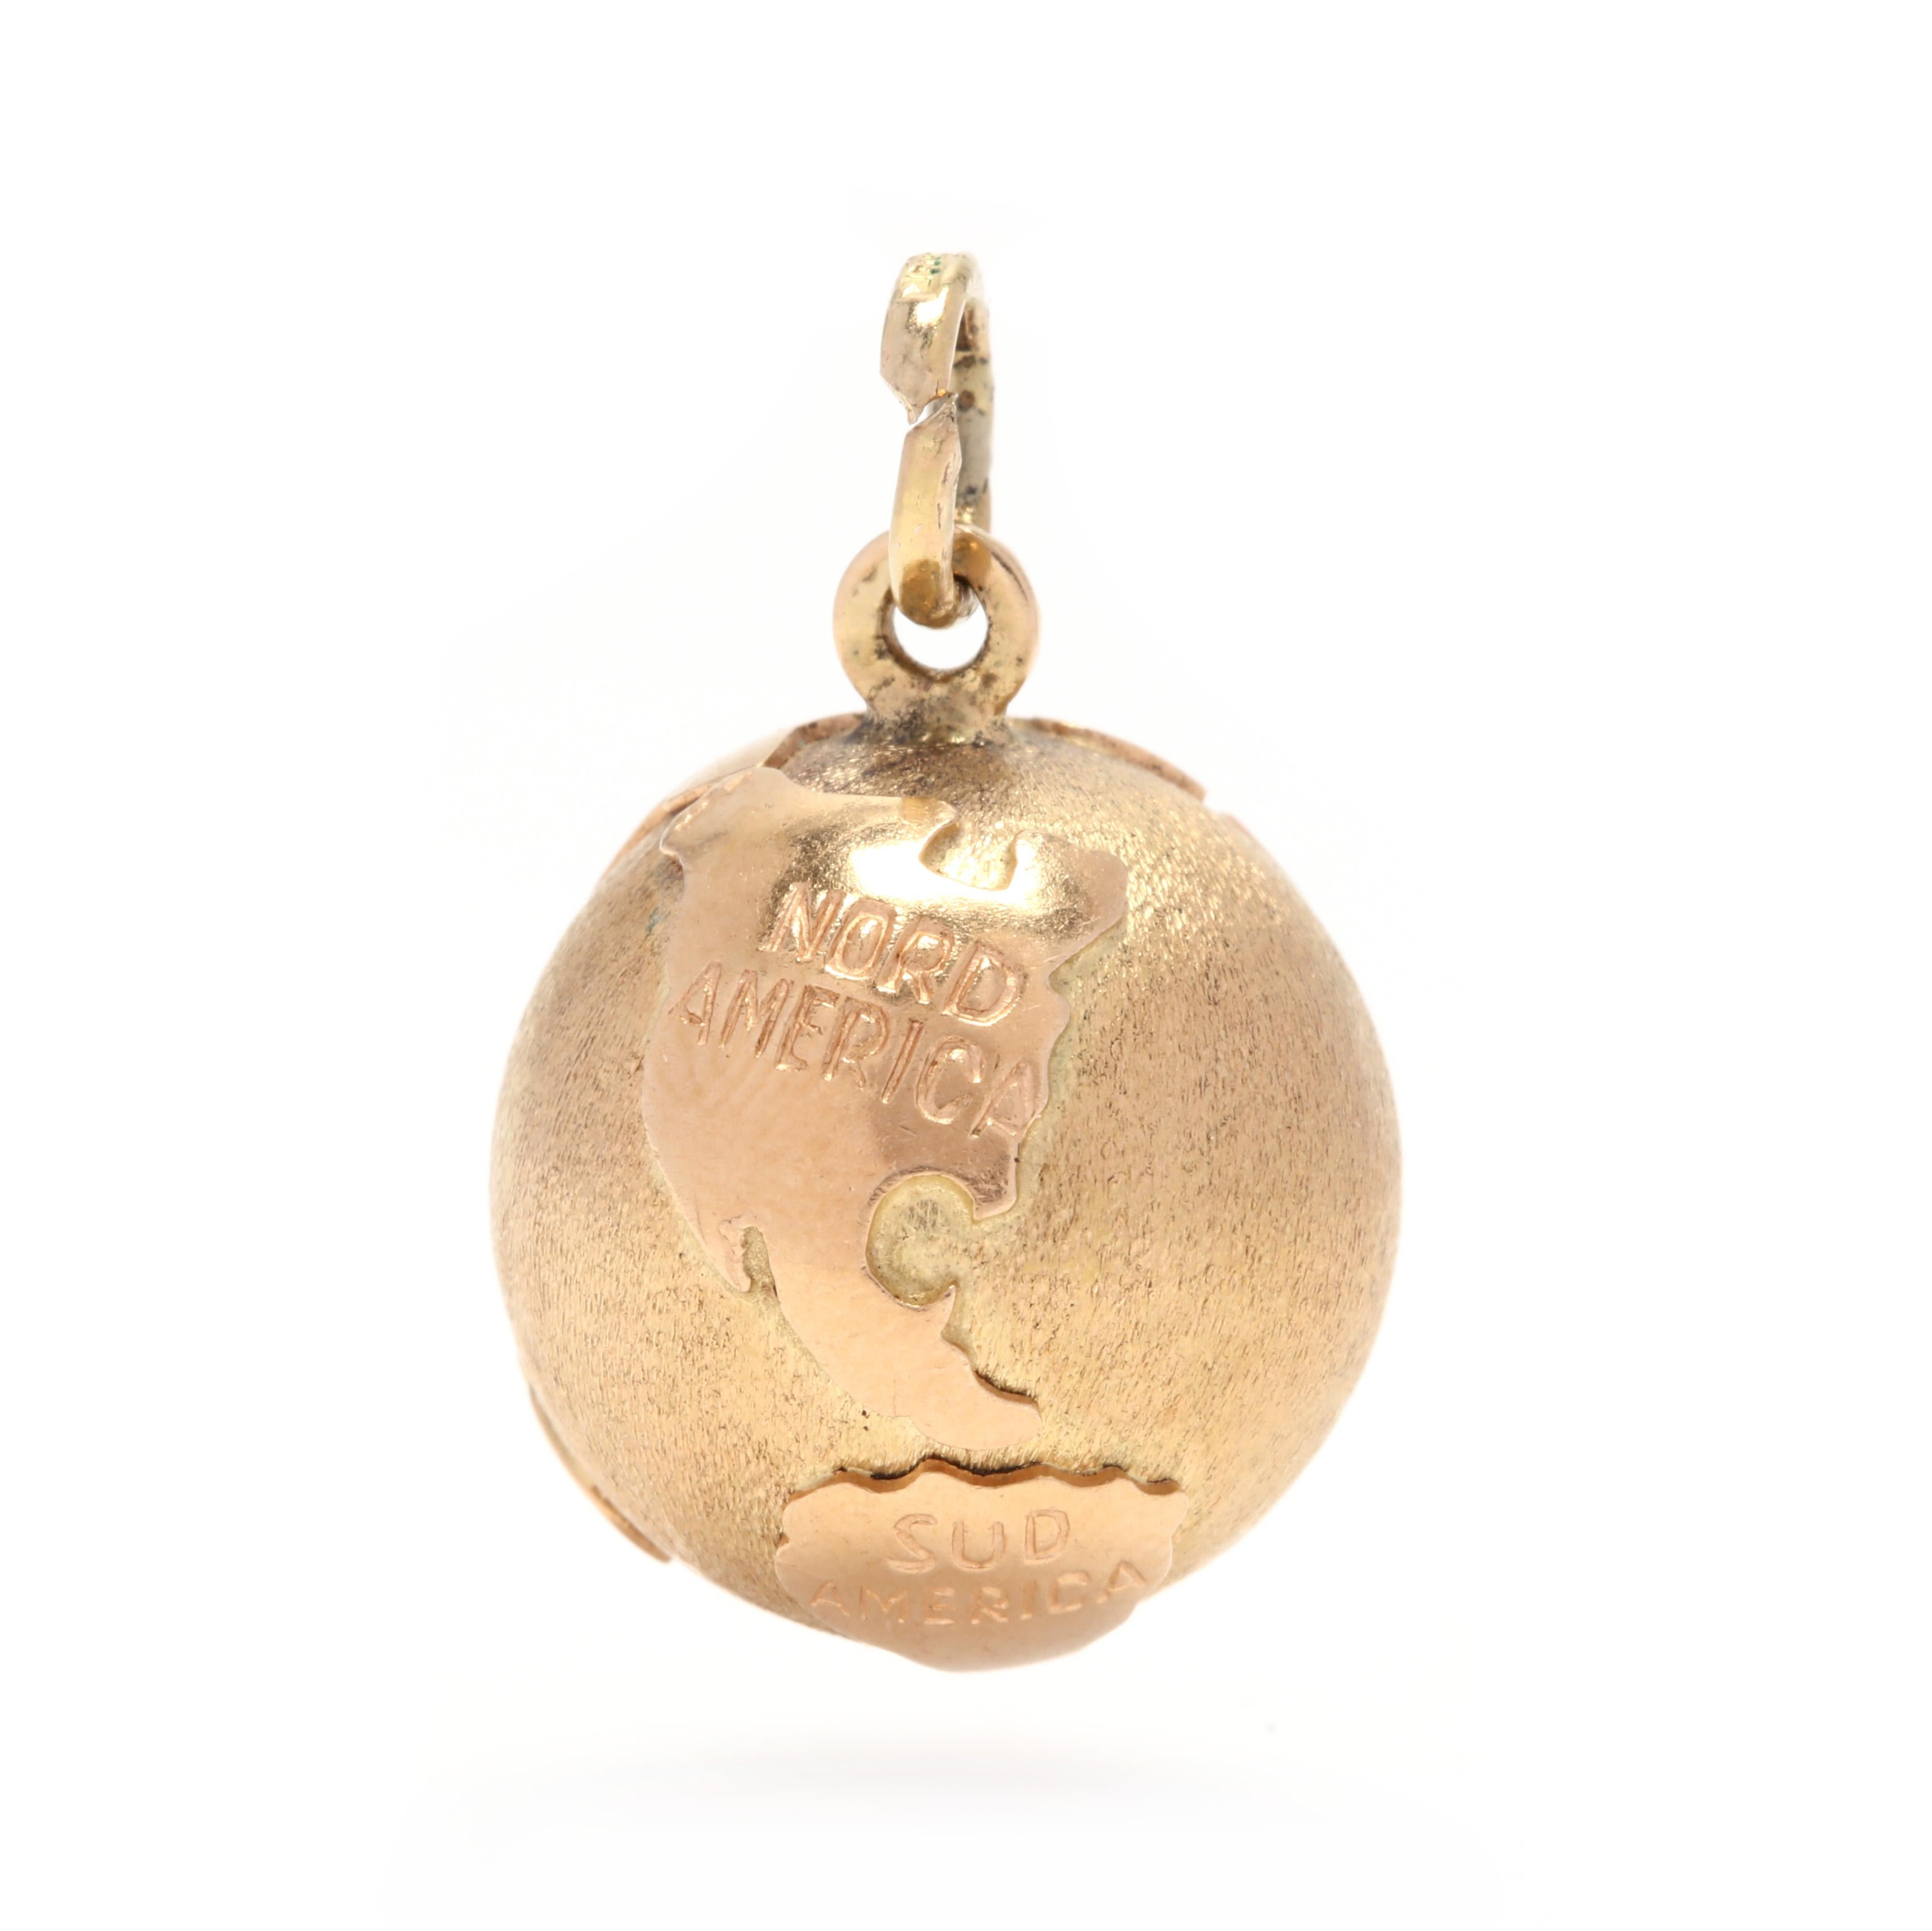 An 18 karat yellow gold globe charm / pendant. This charm features a ball shape with applied continent shaped features with engraving stating 